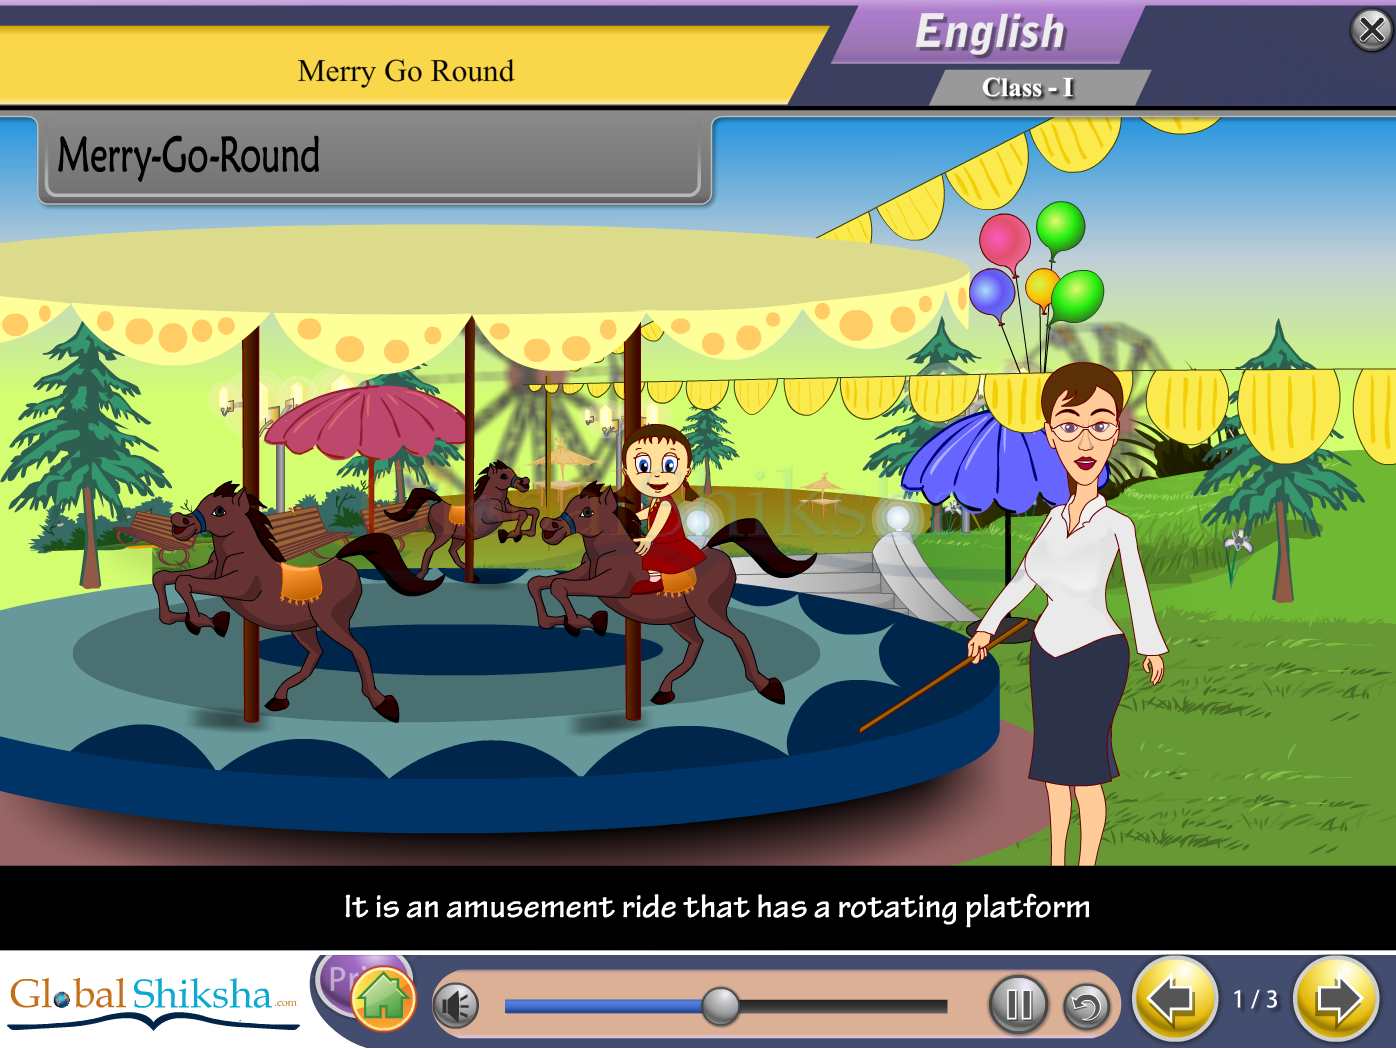 NCERT Class 1 Maths, Science and English Animated Pendrive in English